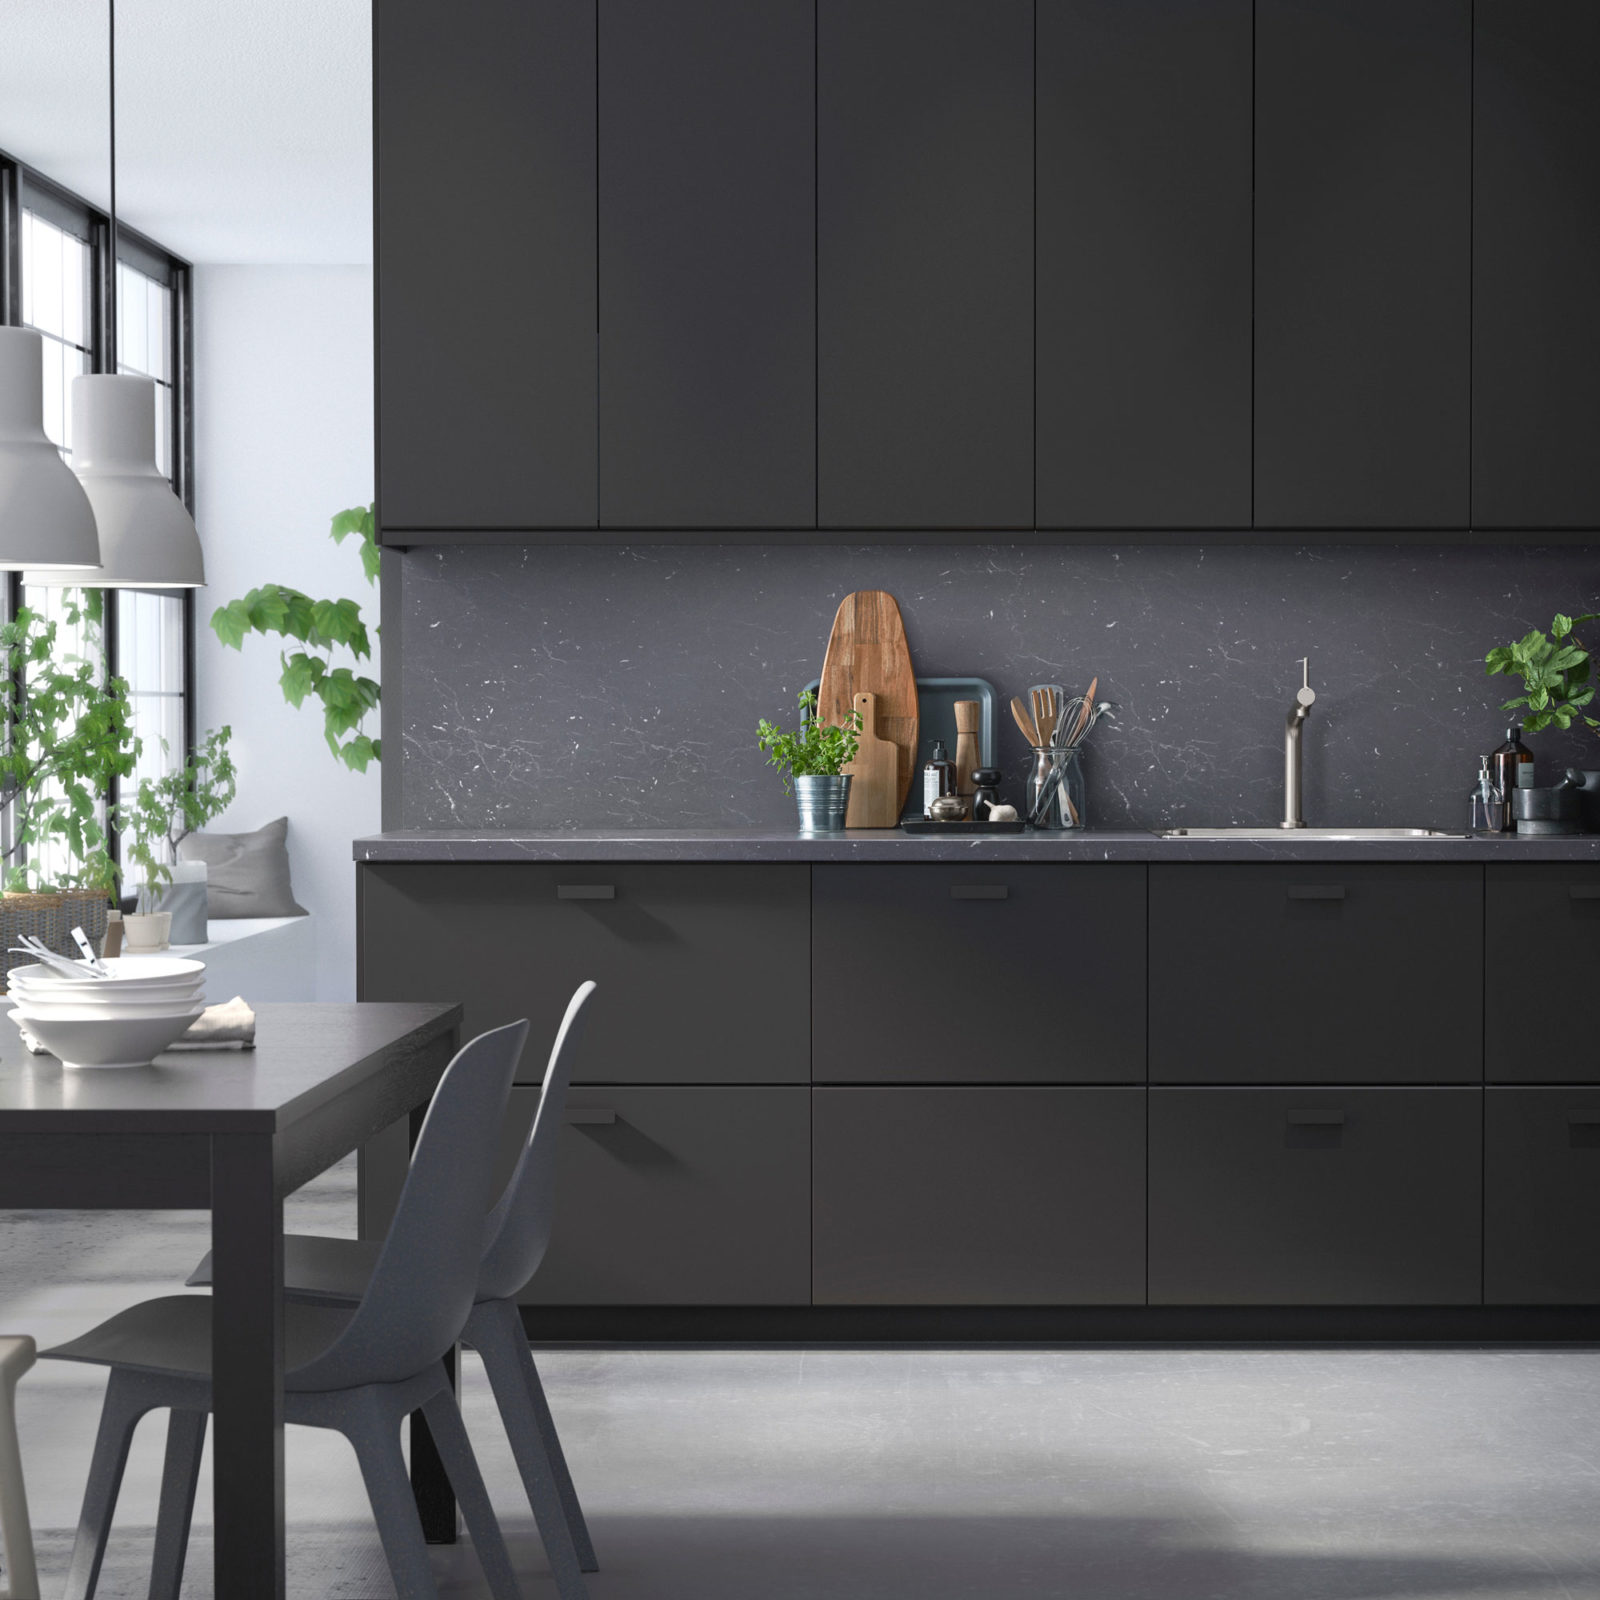 Kitchen with matt black fronts with chamfered edges, a dining table and chairs in the foreground, KUNGSBACKA.